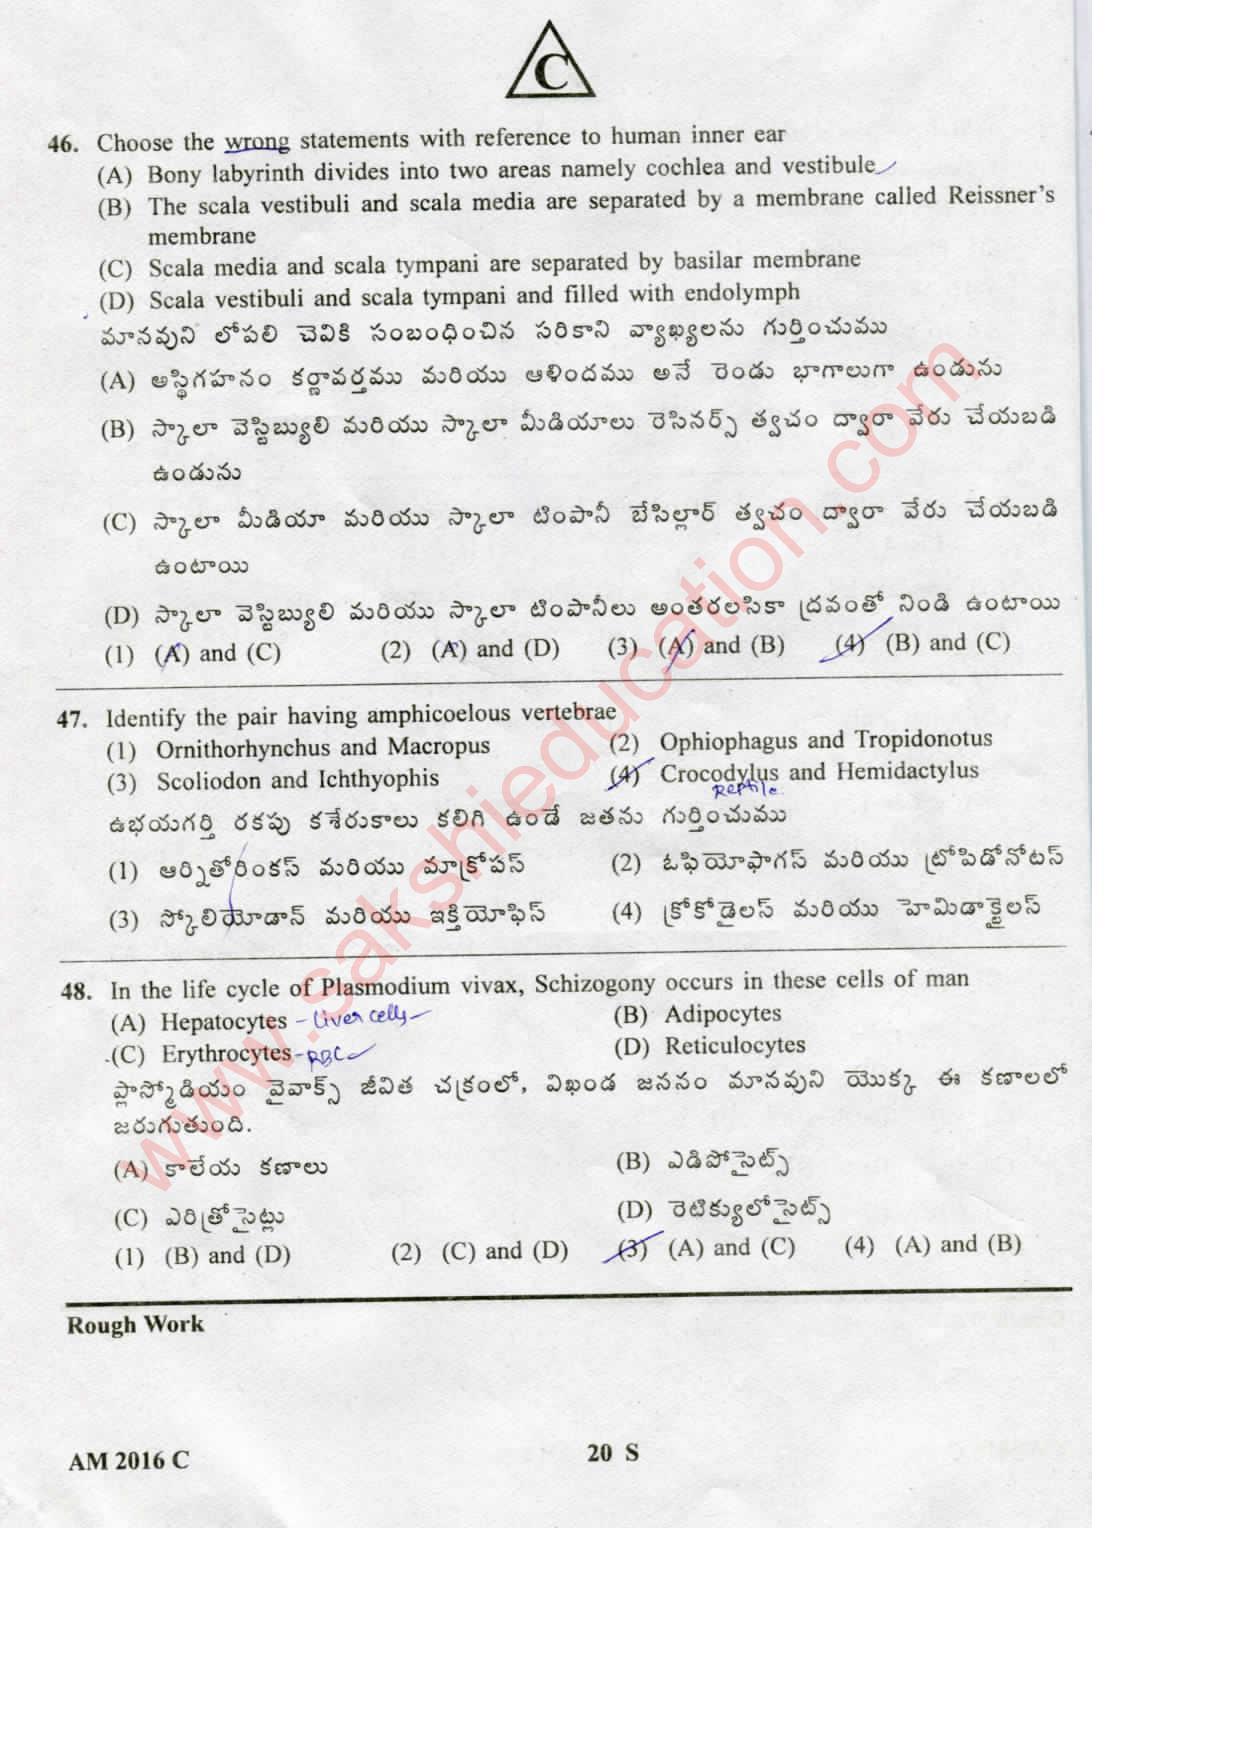 TS EAMCET 2016 Medical Question Paper with Key (Held on 15 May 2016) - Page 20